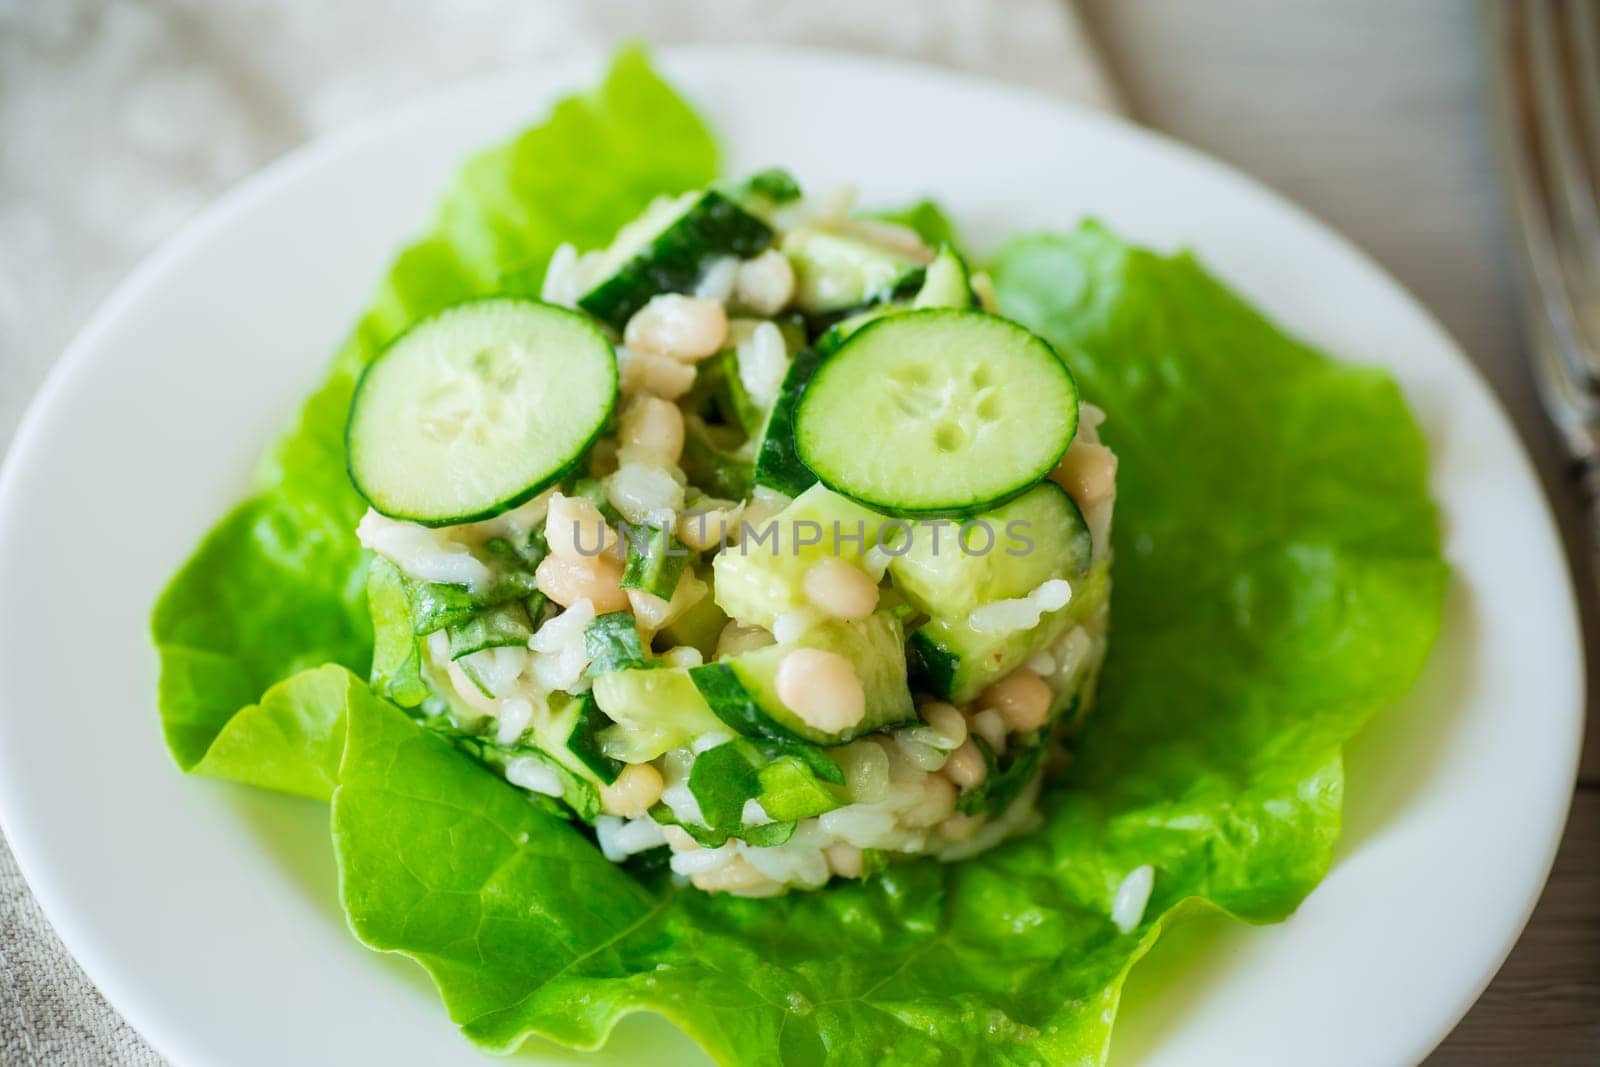 fresh summer salad with beans, rice, cucumbers and other vegetables in a plate on a wooden table.